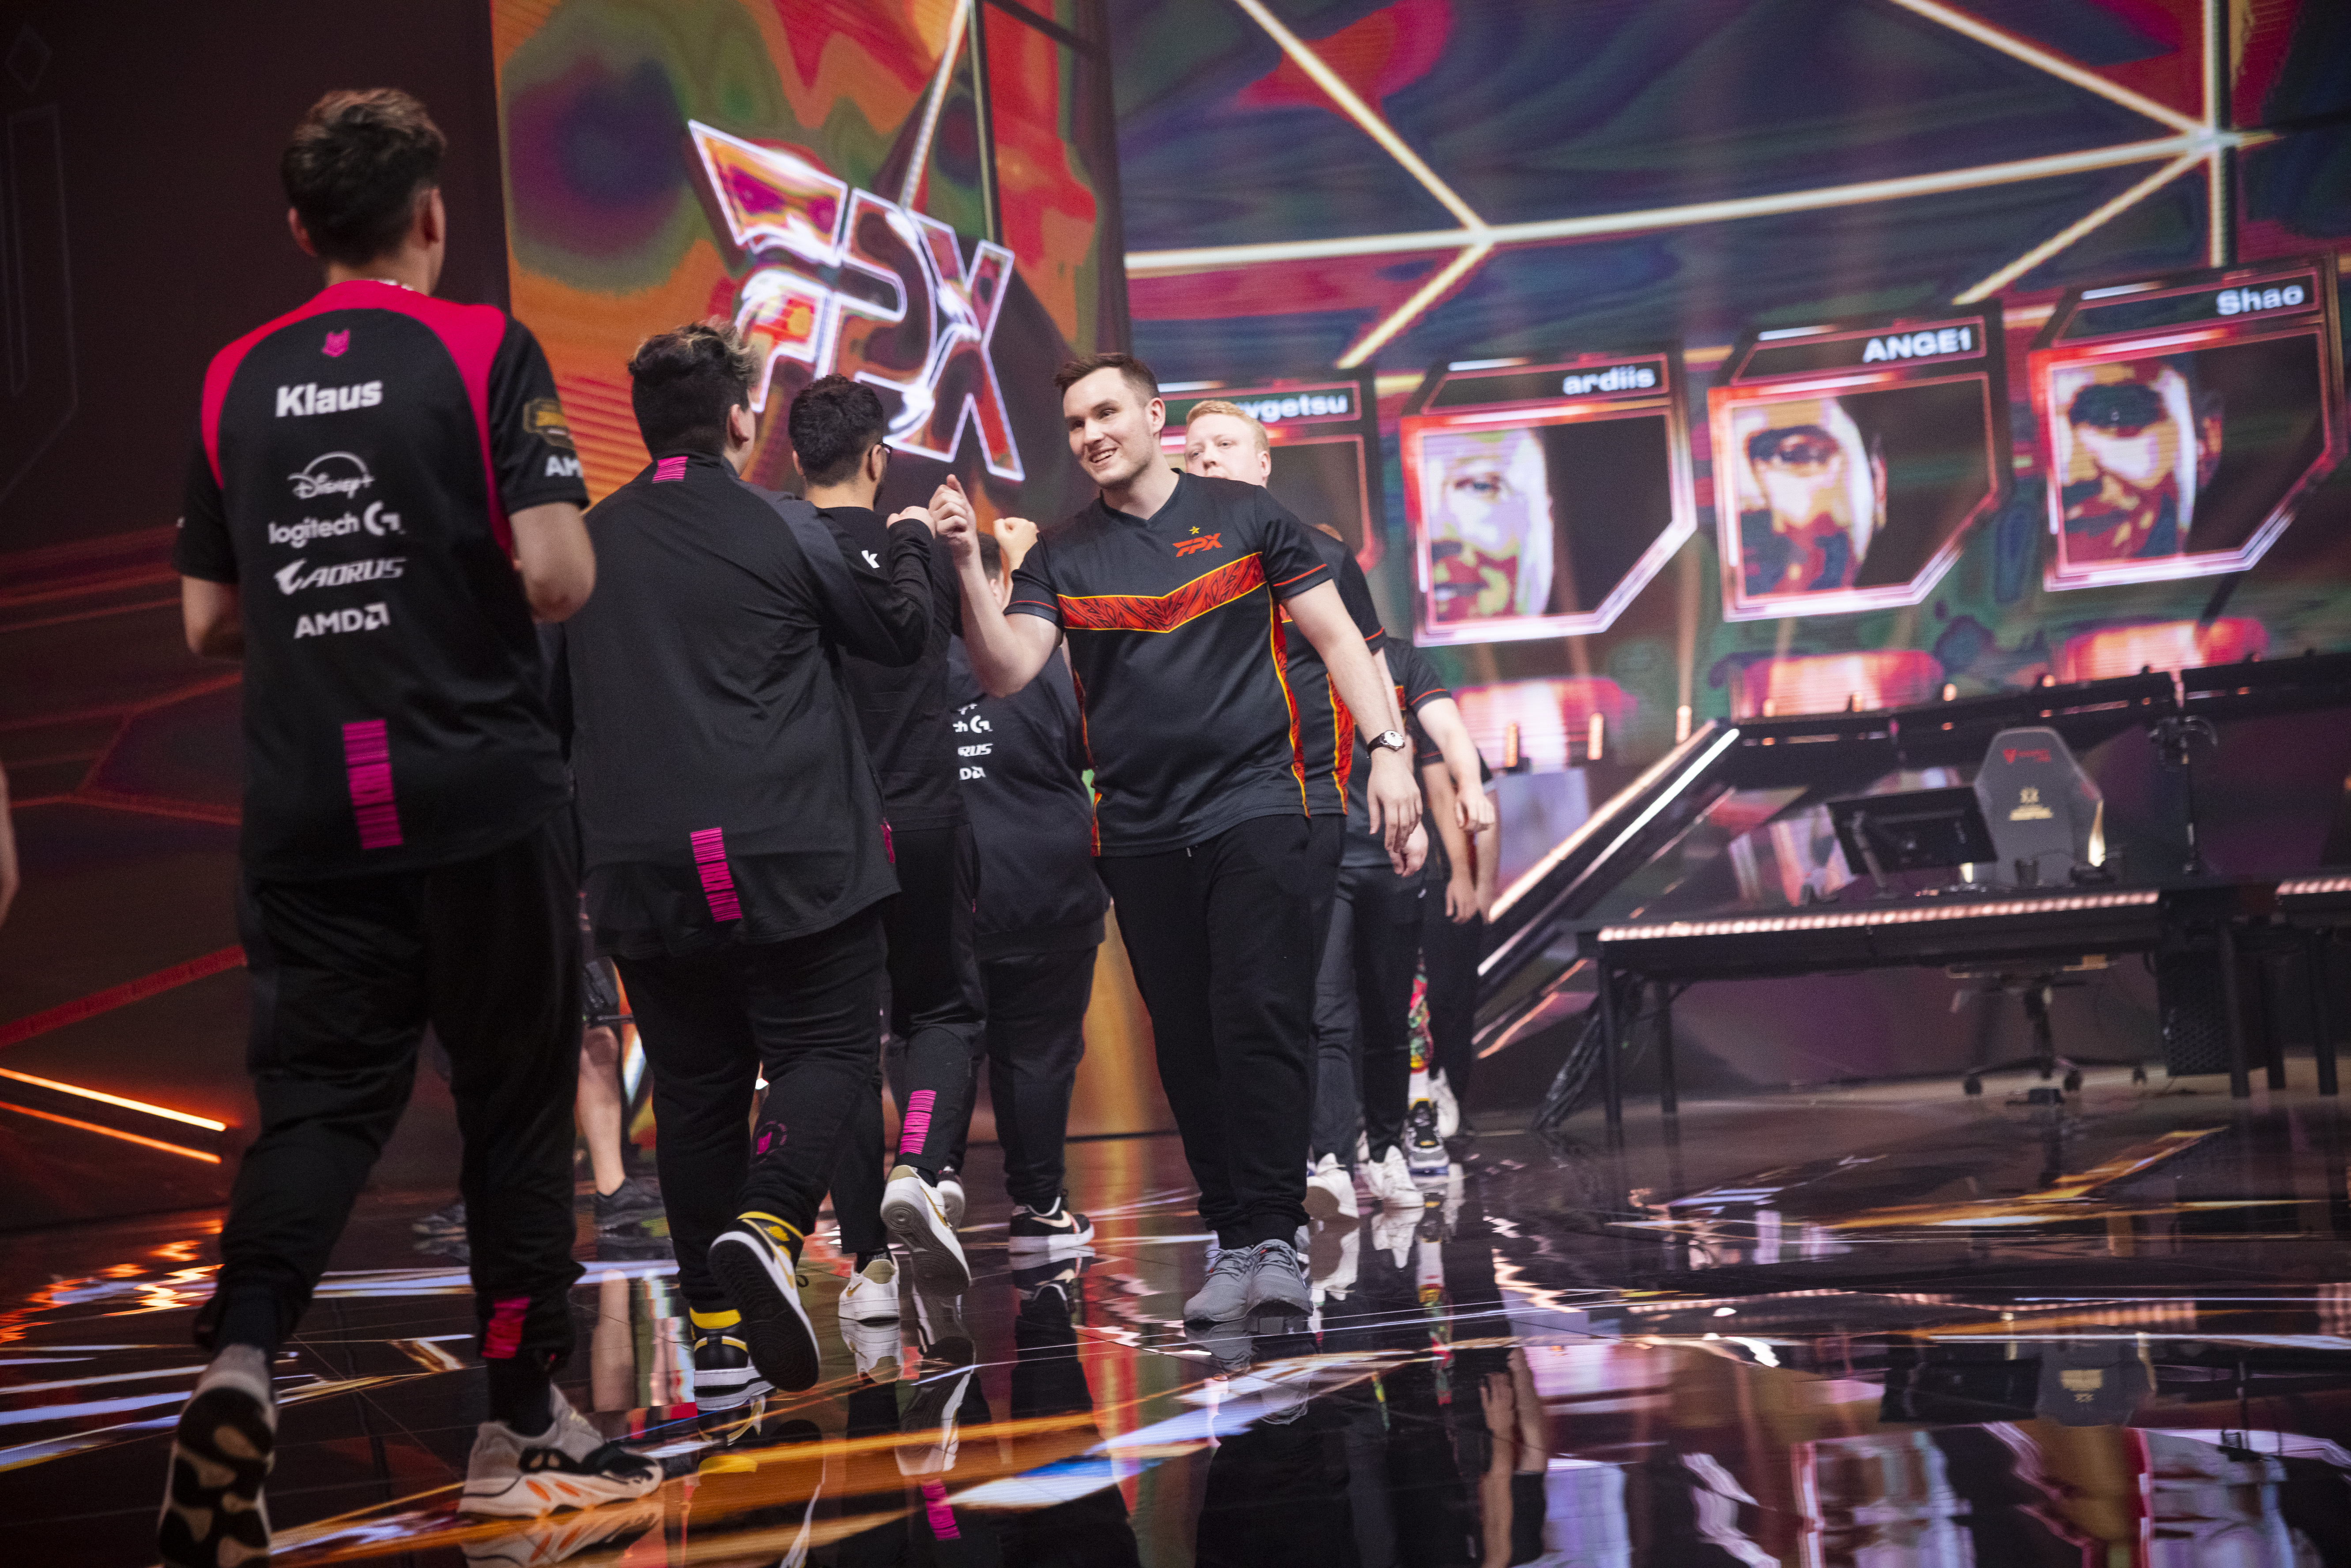 ISTANBUL, TURKEY - SEPTEMBER 3: KRU Esports and FunPlus Phoenix greet onstage at the VALORANT Champions 2022 Istanbul Groups Stage on September 3, 2022 in Istanbul, Turkey. (Photo by Colin Young-Wolff/Riot Games)